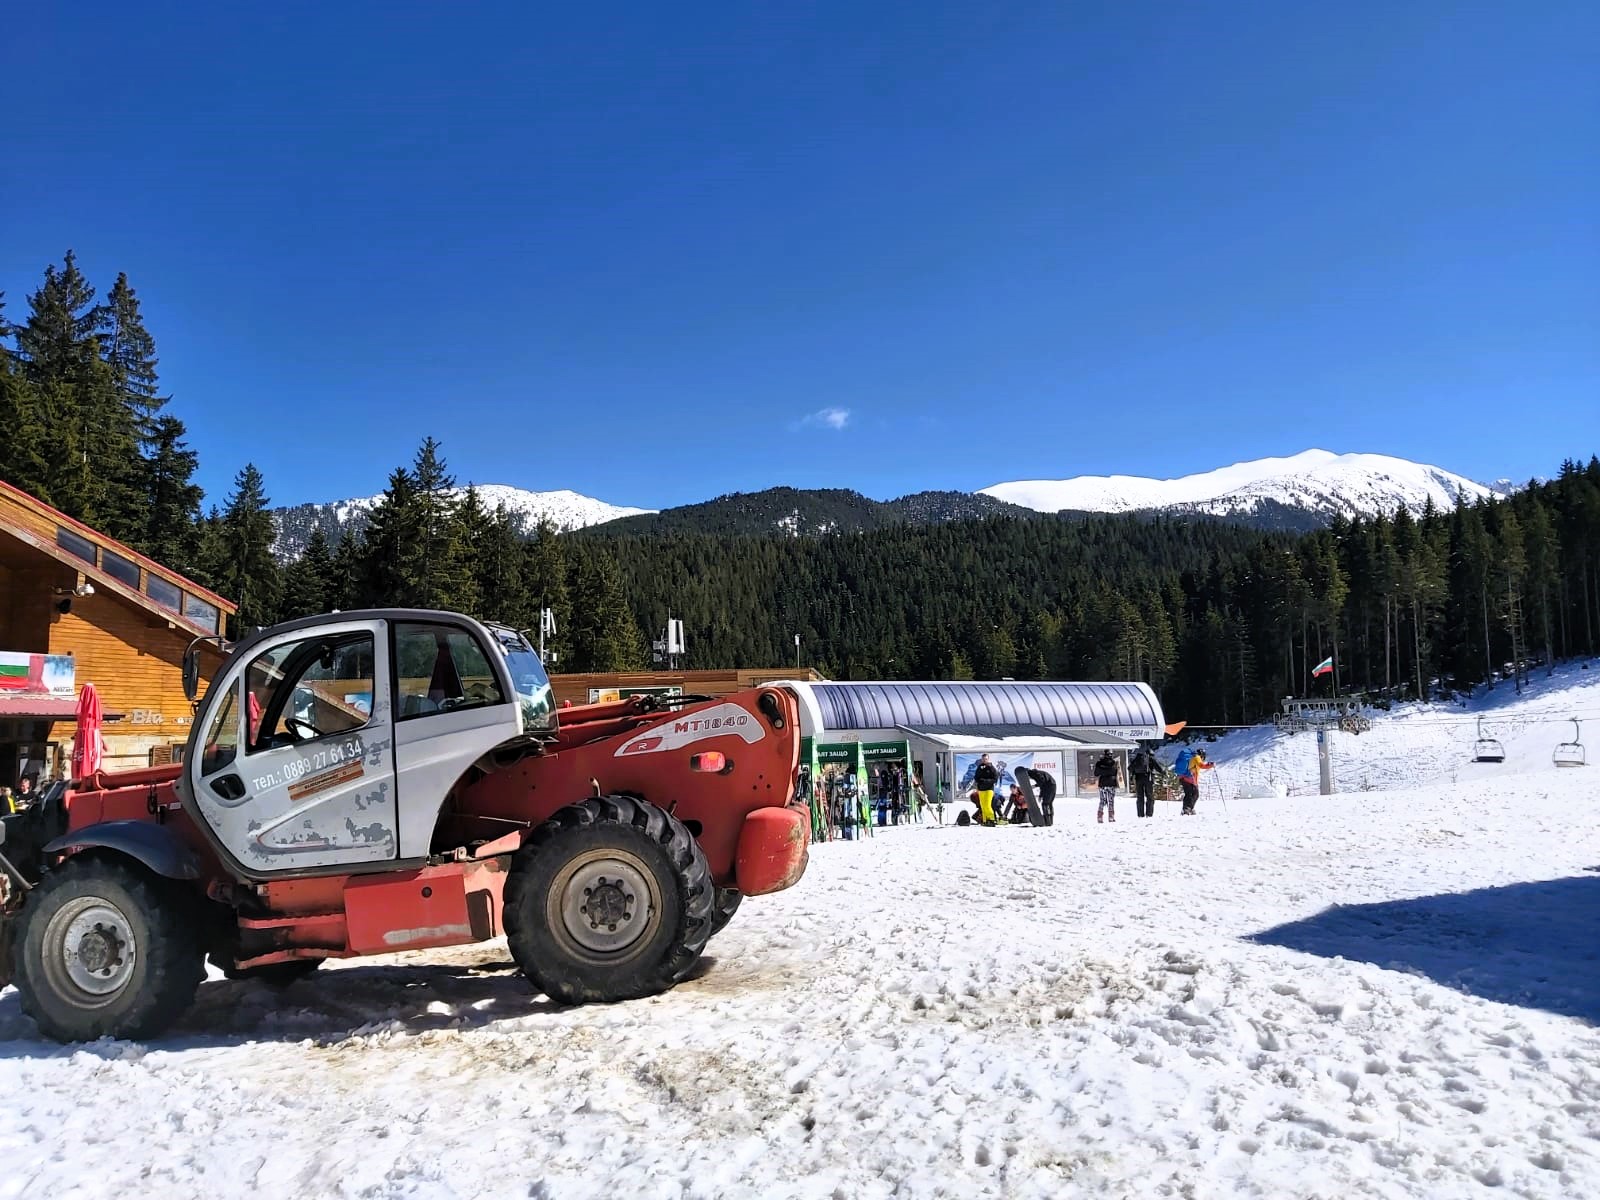 A snow truck on the mountain in Bansko, Bulgaria